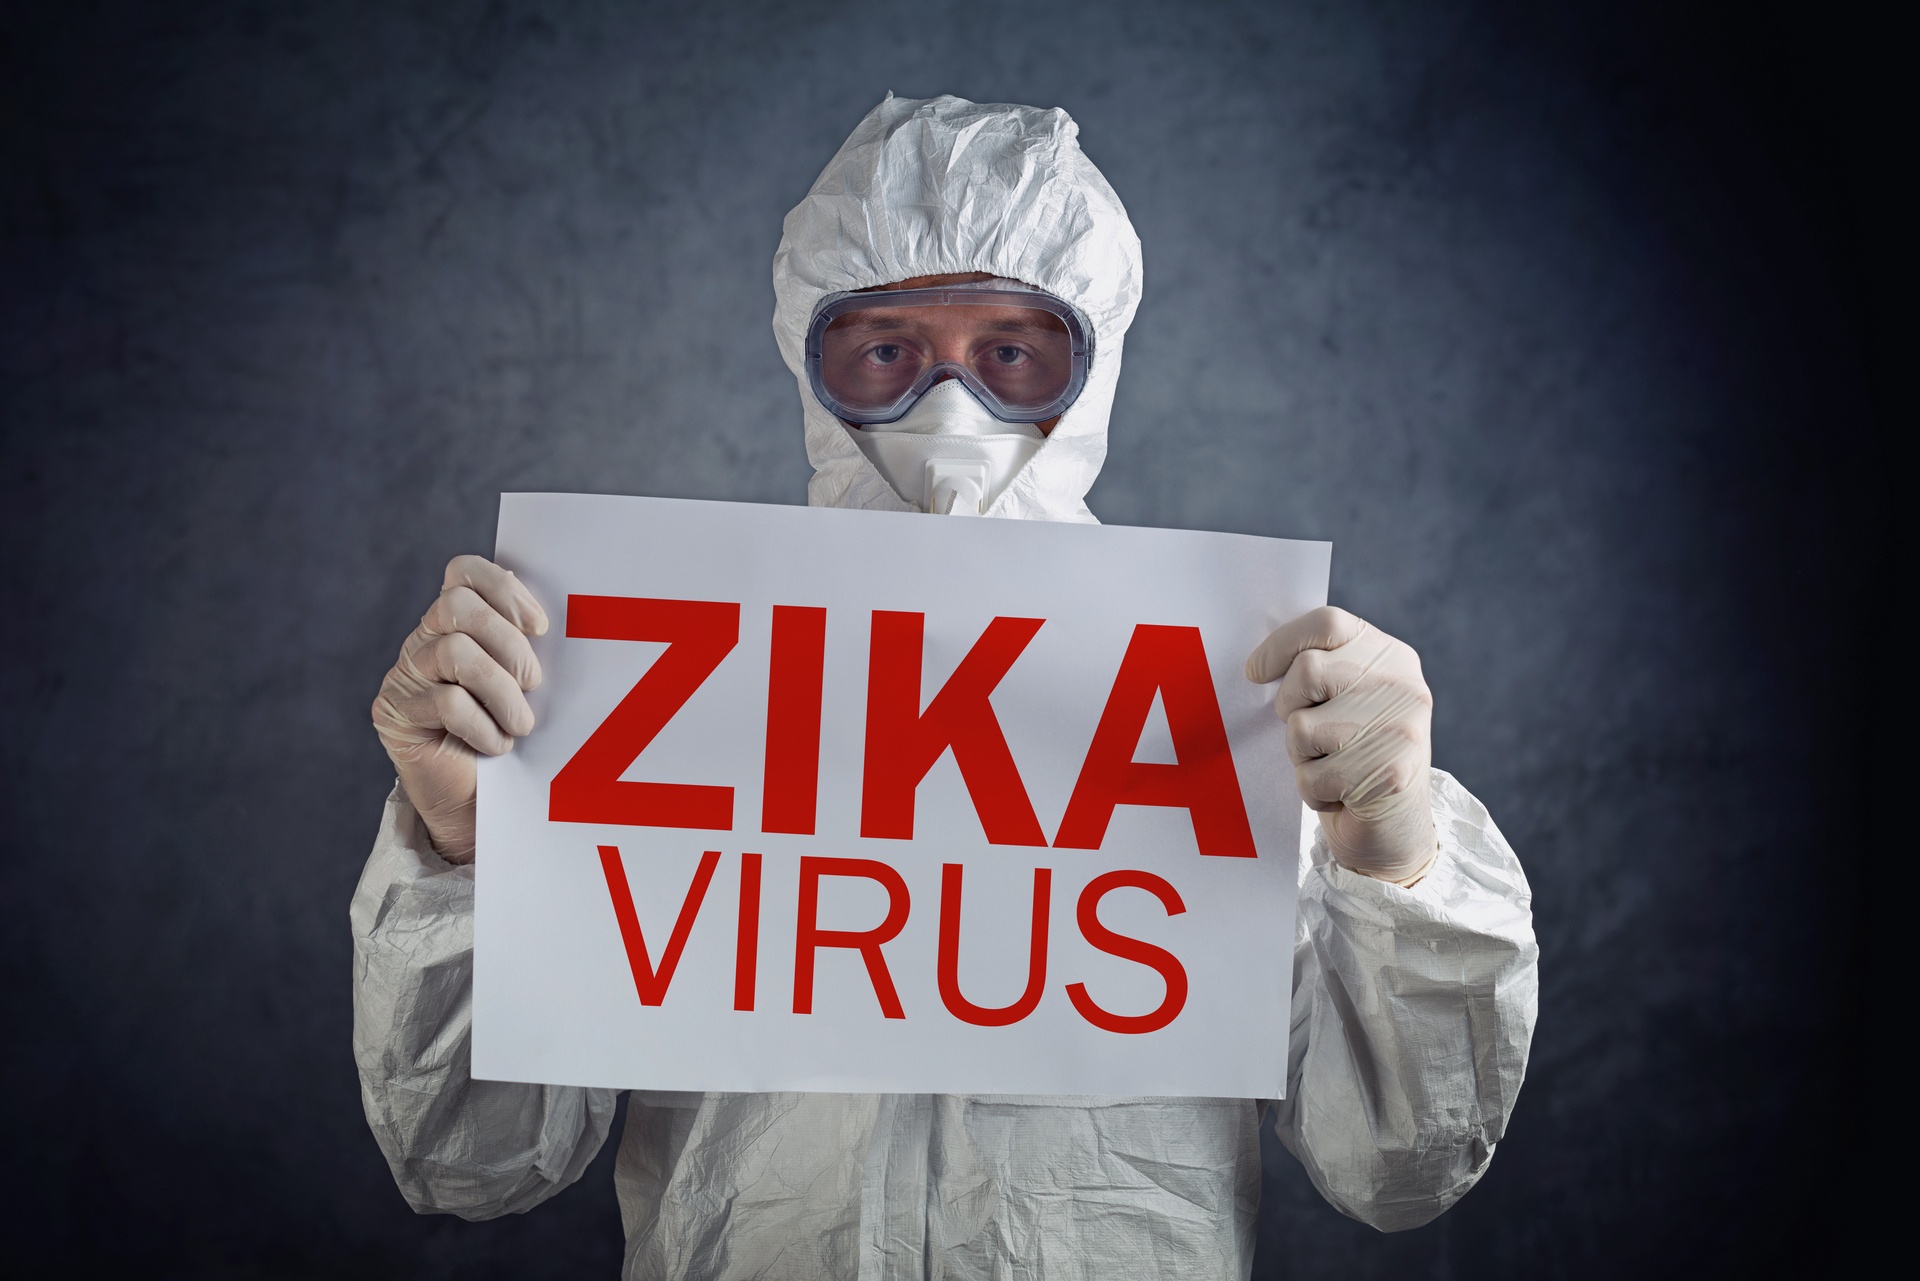 Zika virus concept, medical worker in protective clothes